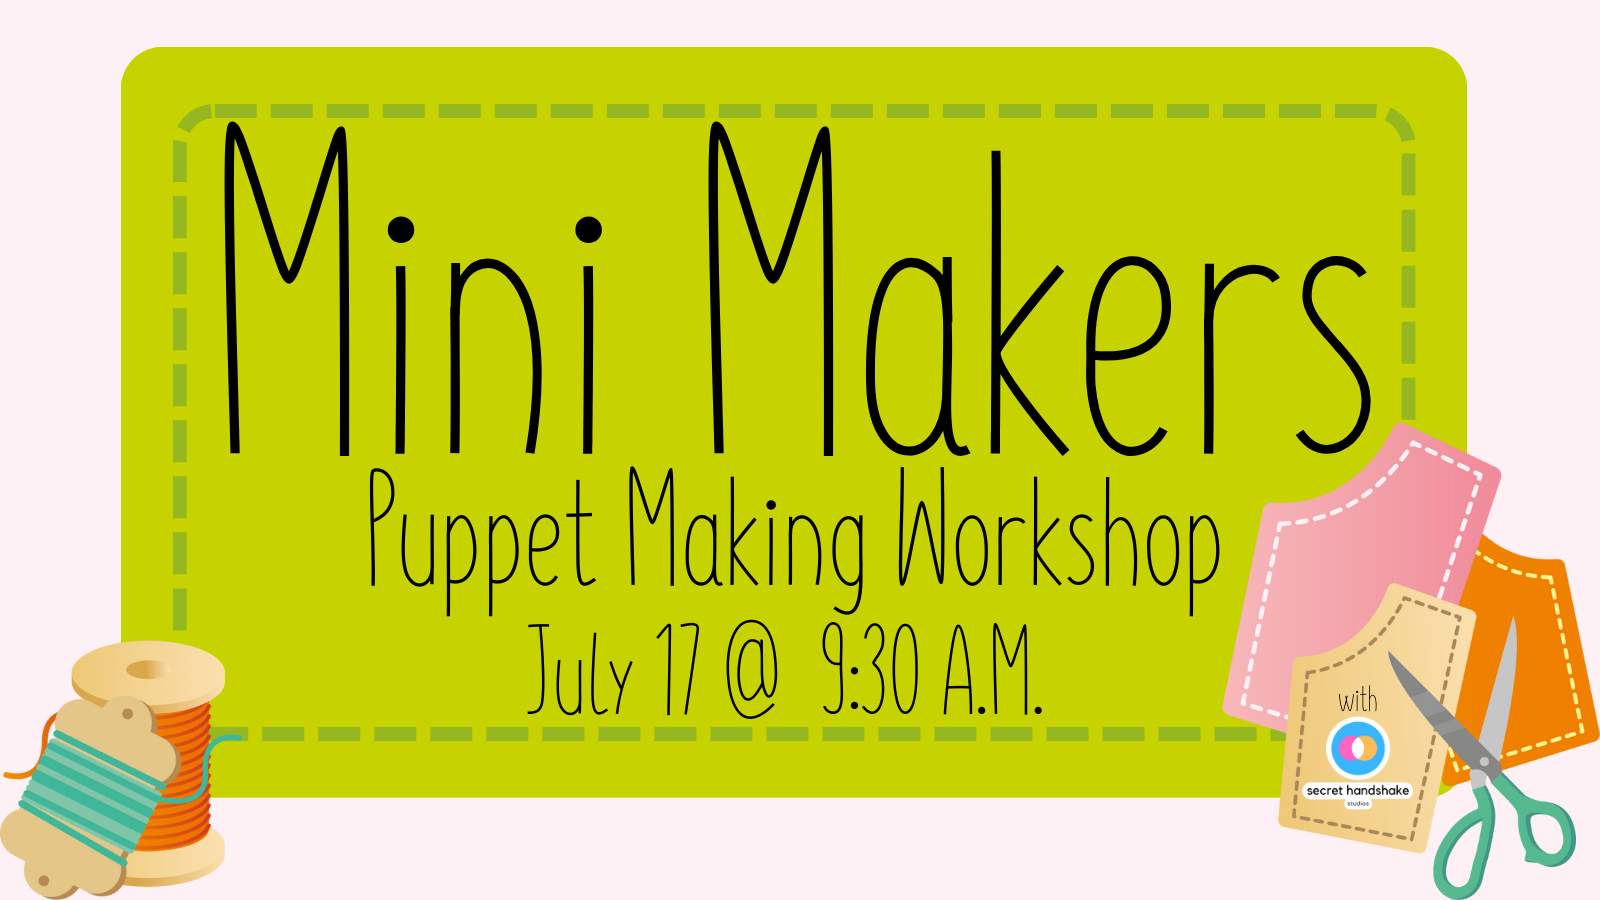 Craft themed border with text that reads: Mini Makers: Puppet Making Workshop July 17 @ 9:20 AM.